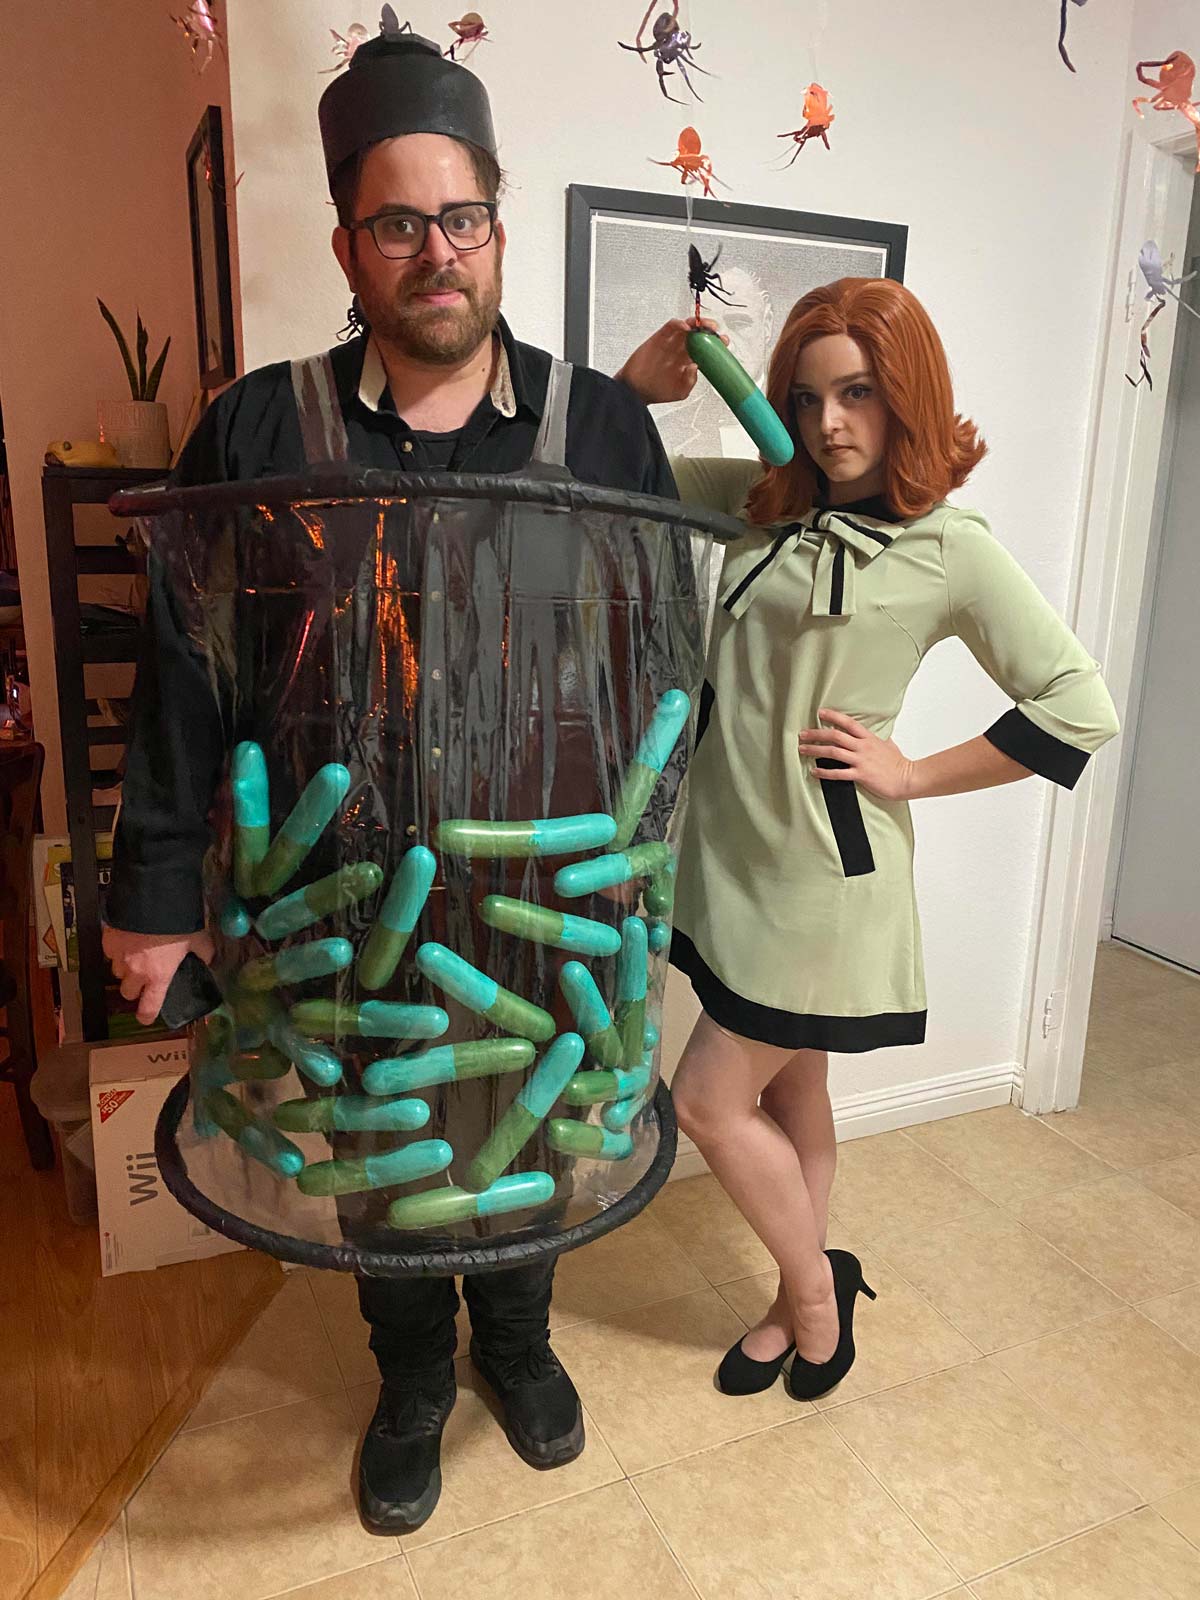 Girlfriend wanted to do a couples costume from the Queen’s Gambit